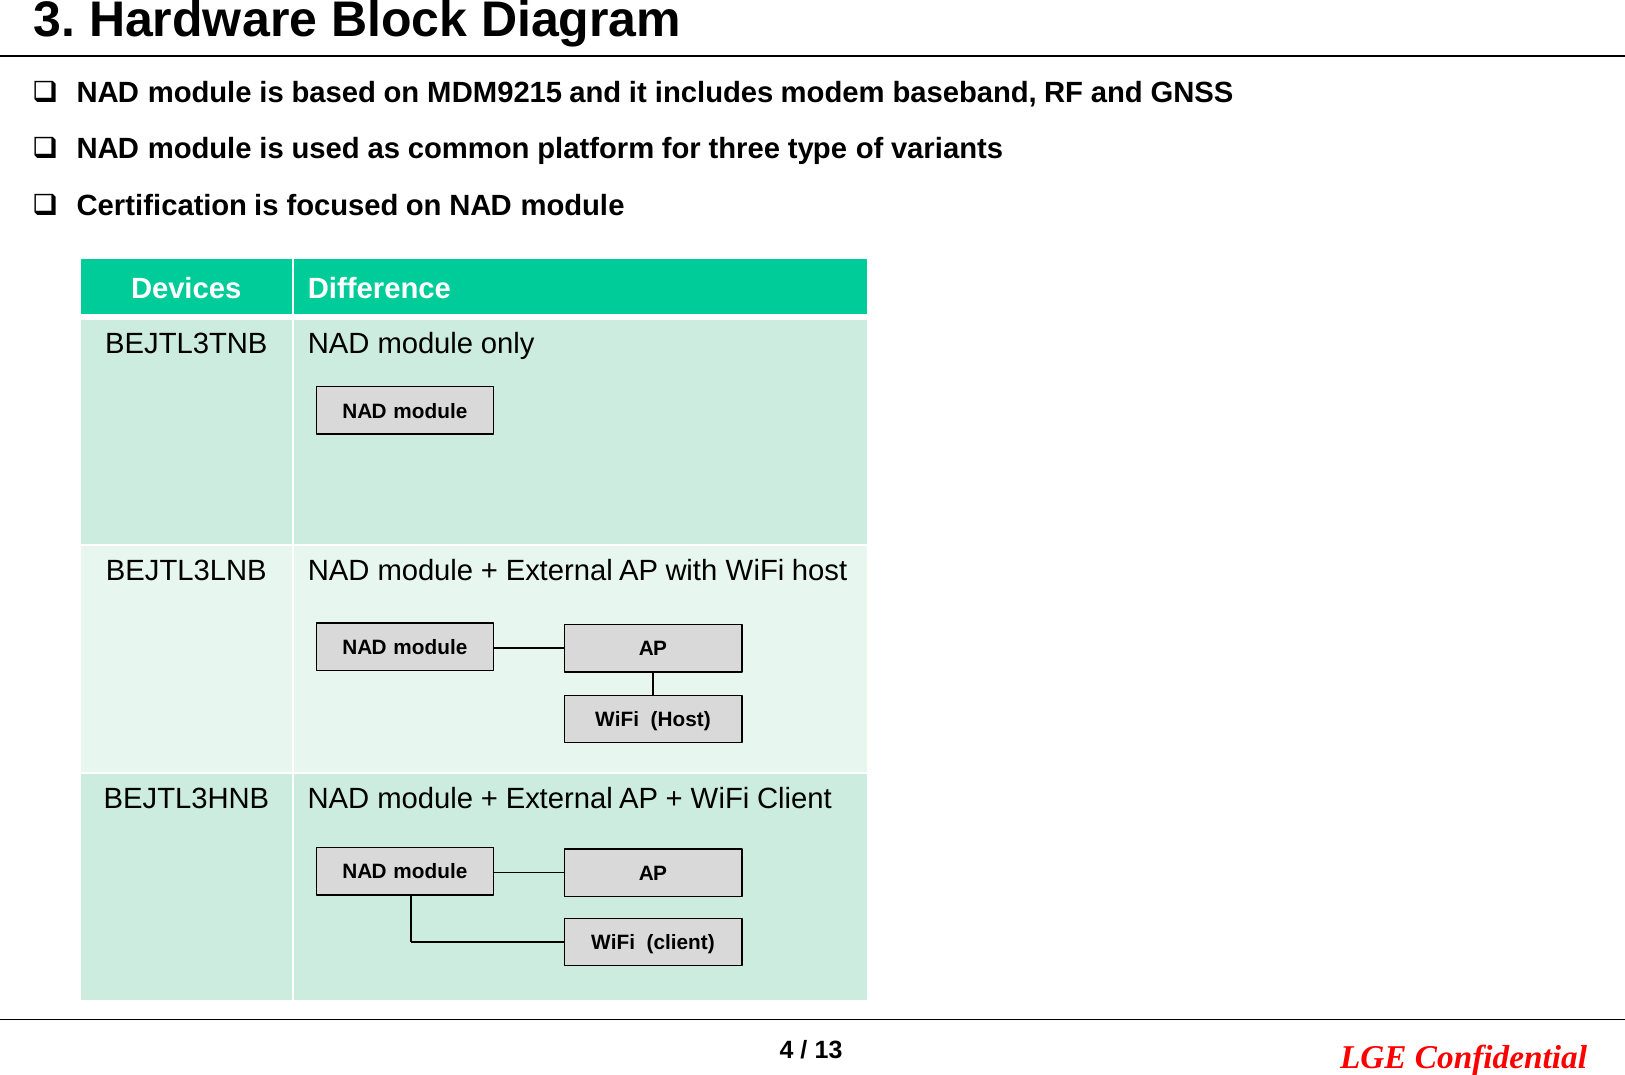 4/ 13 LGE Confidential3. Hardware Block DiagramNAD module is based on MDM9215 and it includes modem baseband, RF and GNSSNAD module is used as common platform for three type of variantsCertification is focused on NAD moduleDevices DifferenceBEJTL3TNB NAD module onlyBEJTL3LNB NAD module + External AP with WiFi hostBEJTL3HNB NAD module + External AP + WiFi ClientAPWiFi (Host)APWiFi (client)NAD moduleNAD moduleNAD module